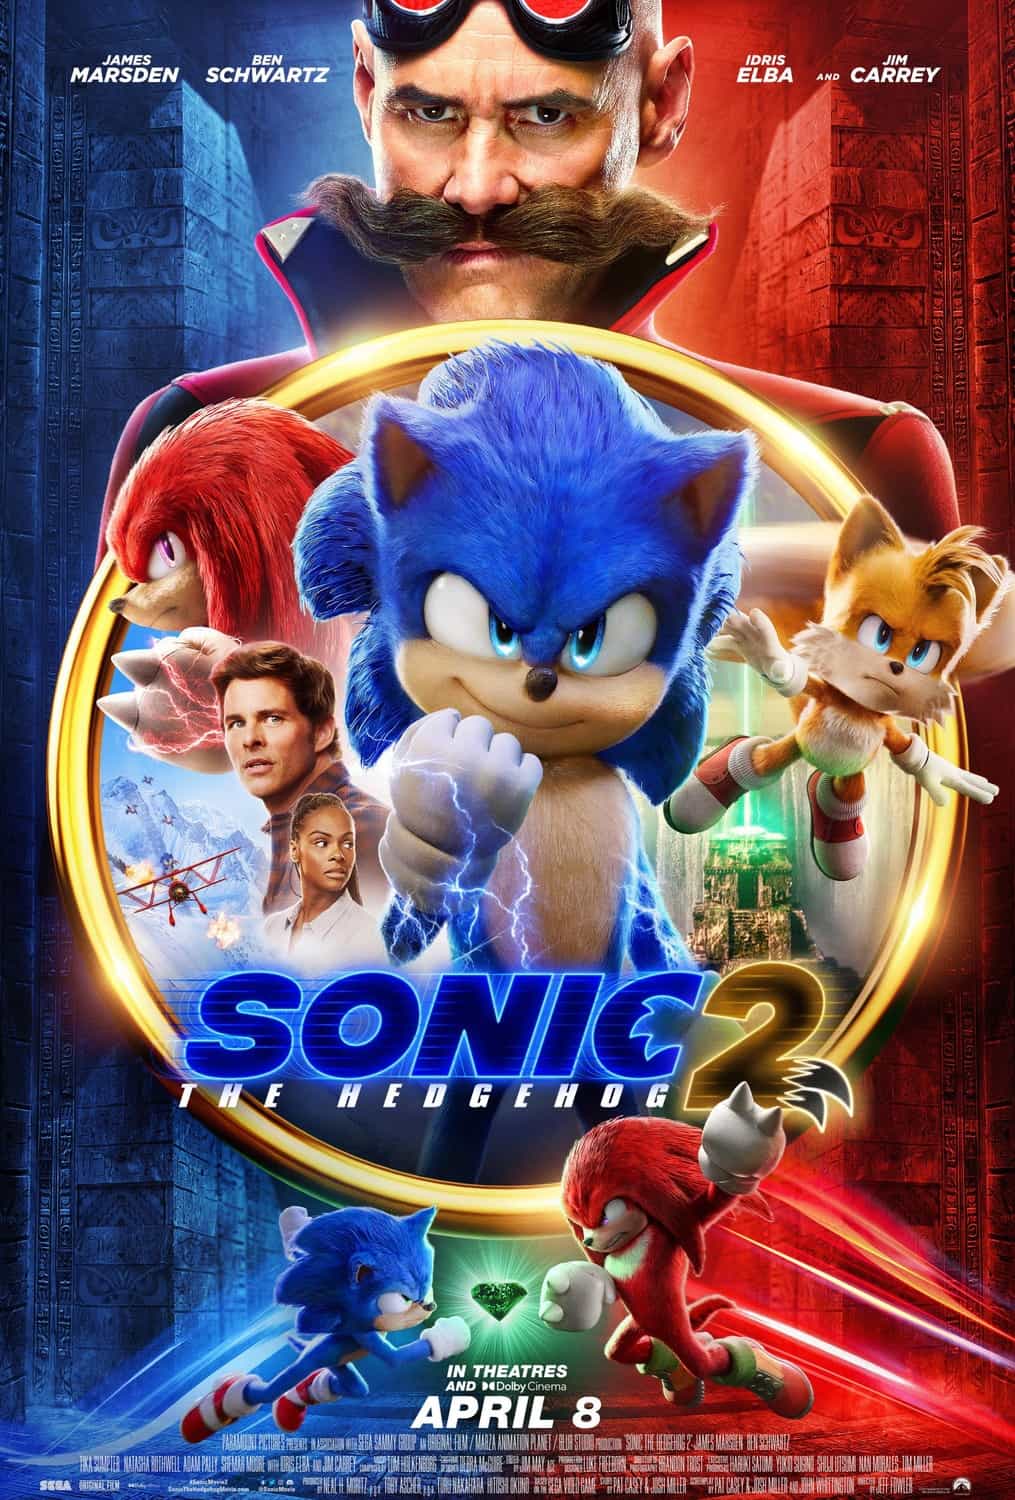 US Box Office Weekend Report 8th - 10th April 2022: Sonic the Hedgehog 2 makes its debut on the US box office with $71 Million and replaces Morbius at the top